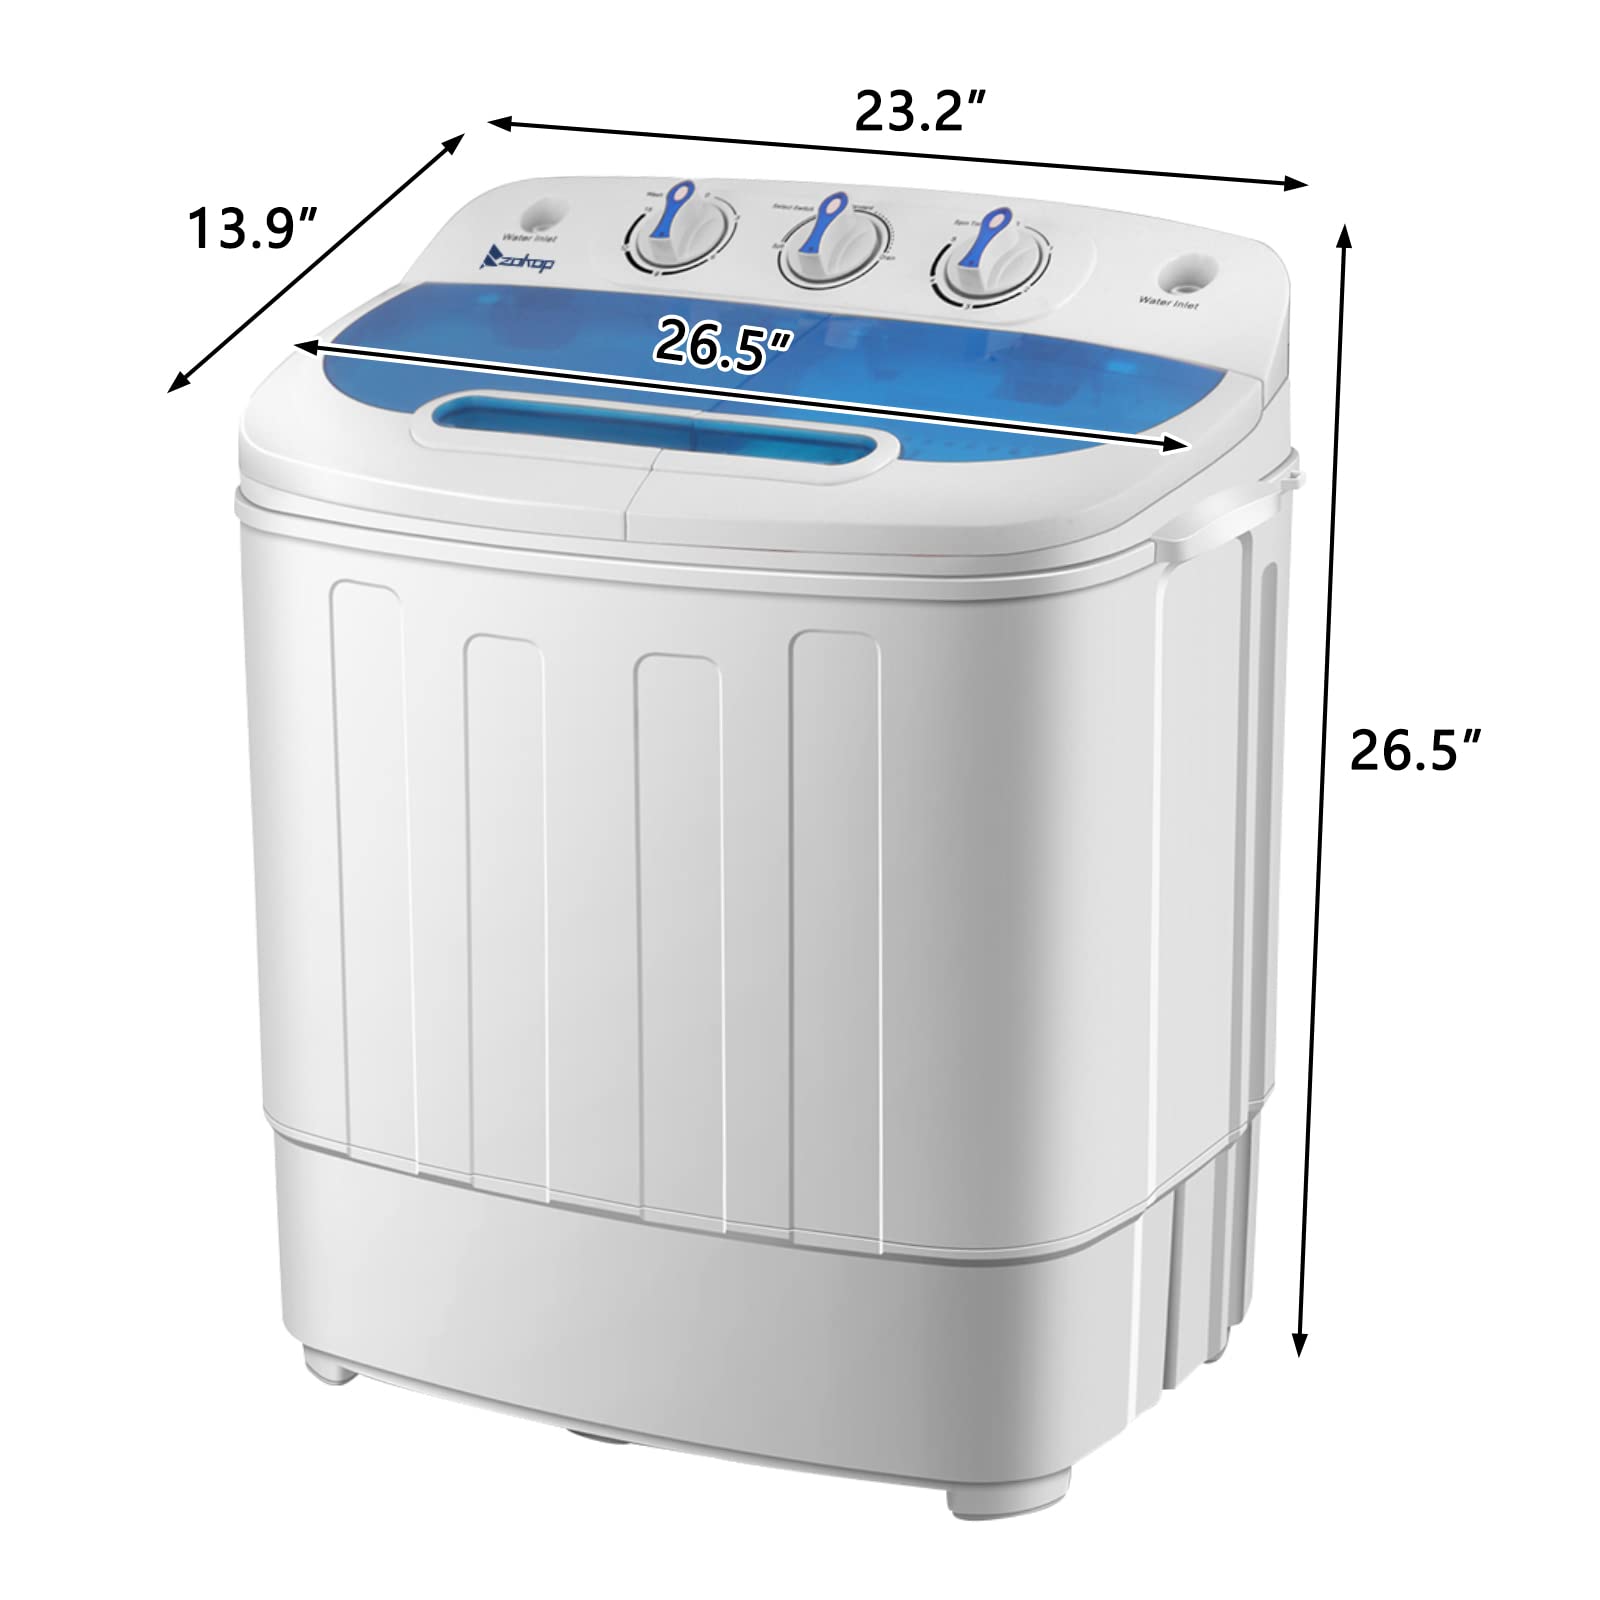 Winado 15LBS Portable Washing Machine, Compact Mini Washer Machine & Dryer Combo, Built-in Gravity Drain, Small Twin Tub Washer with Spin Cycle for Laundry Room, Apartments, Dorms, RV's